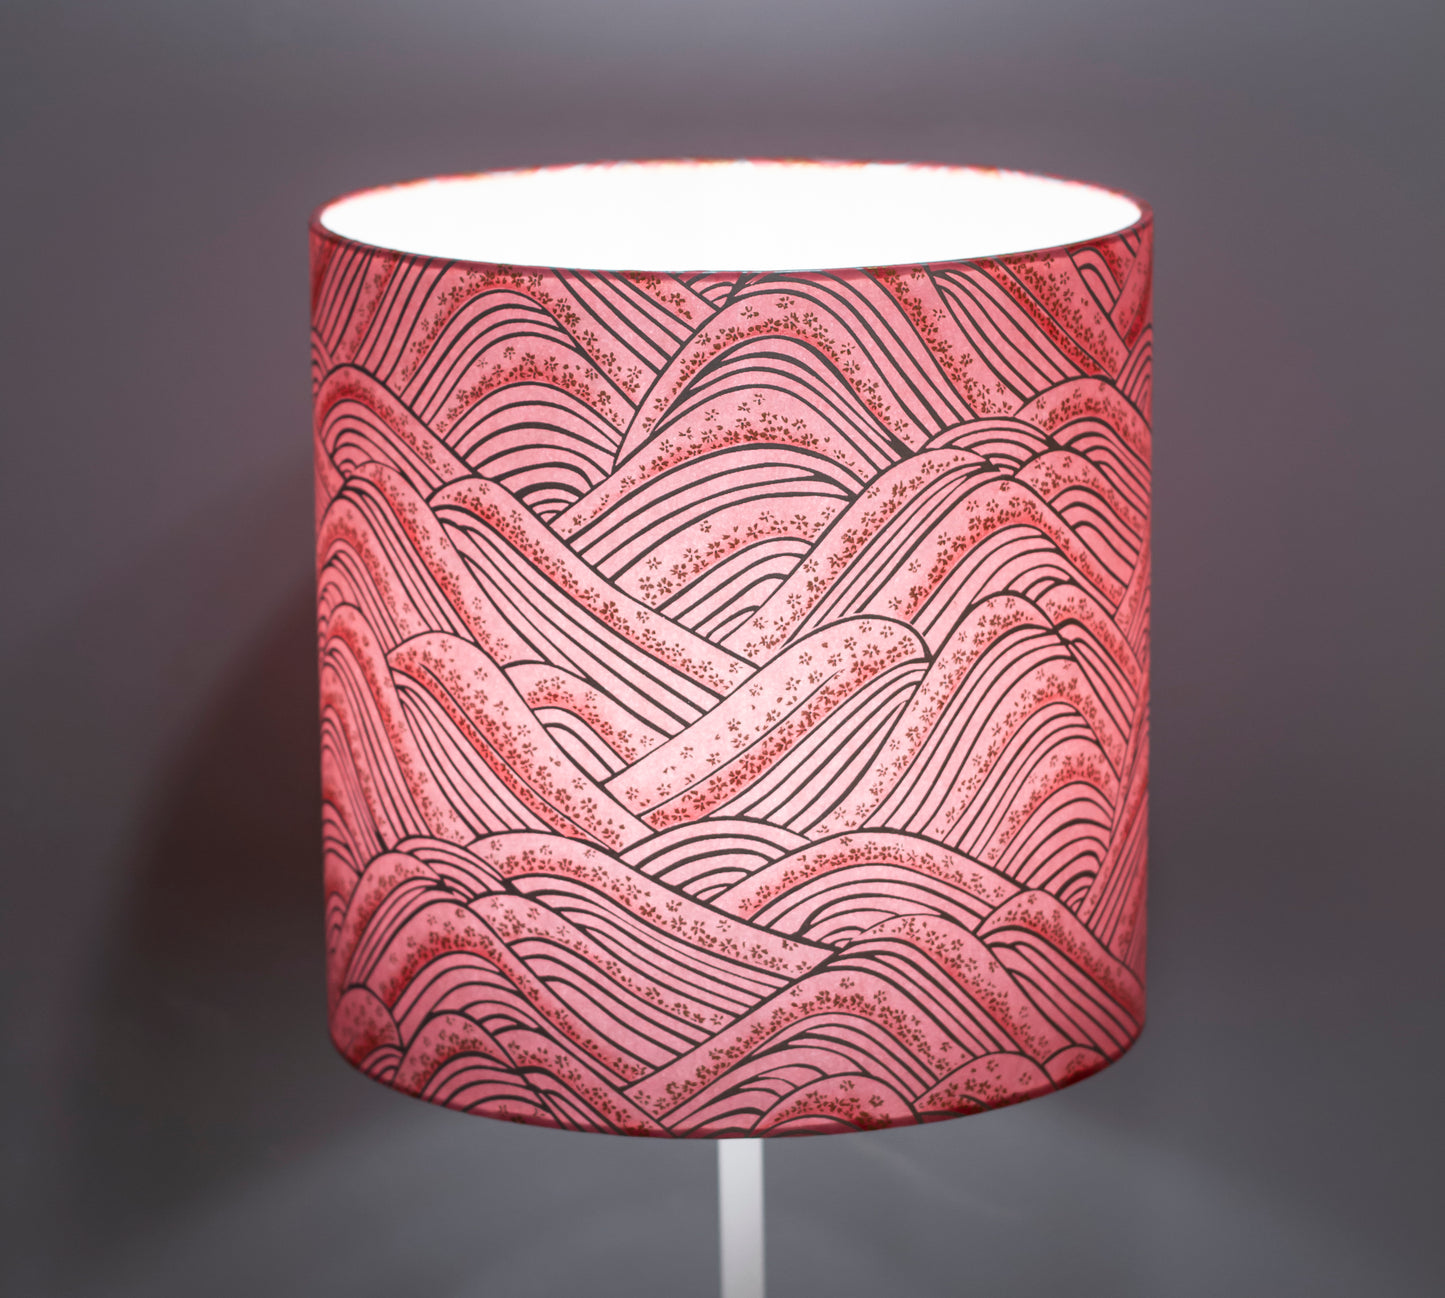 Drum Lamp Shade - W04 ~ Pink Hills with Gold Flowers, 35cm(d) x 20cm(h)